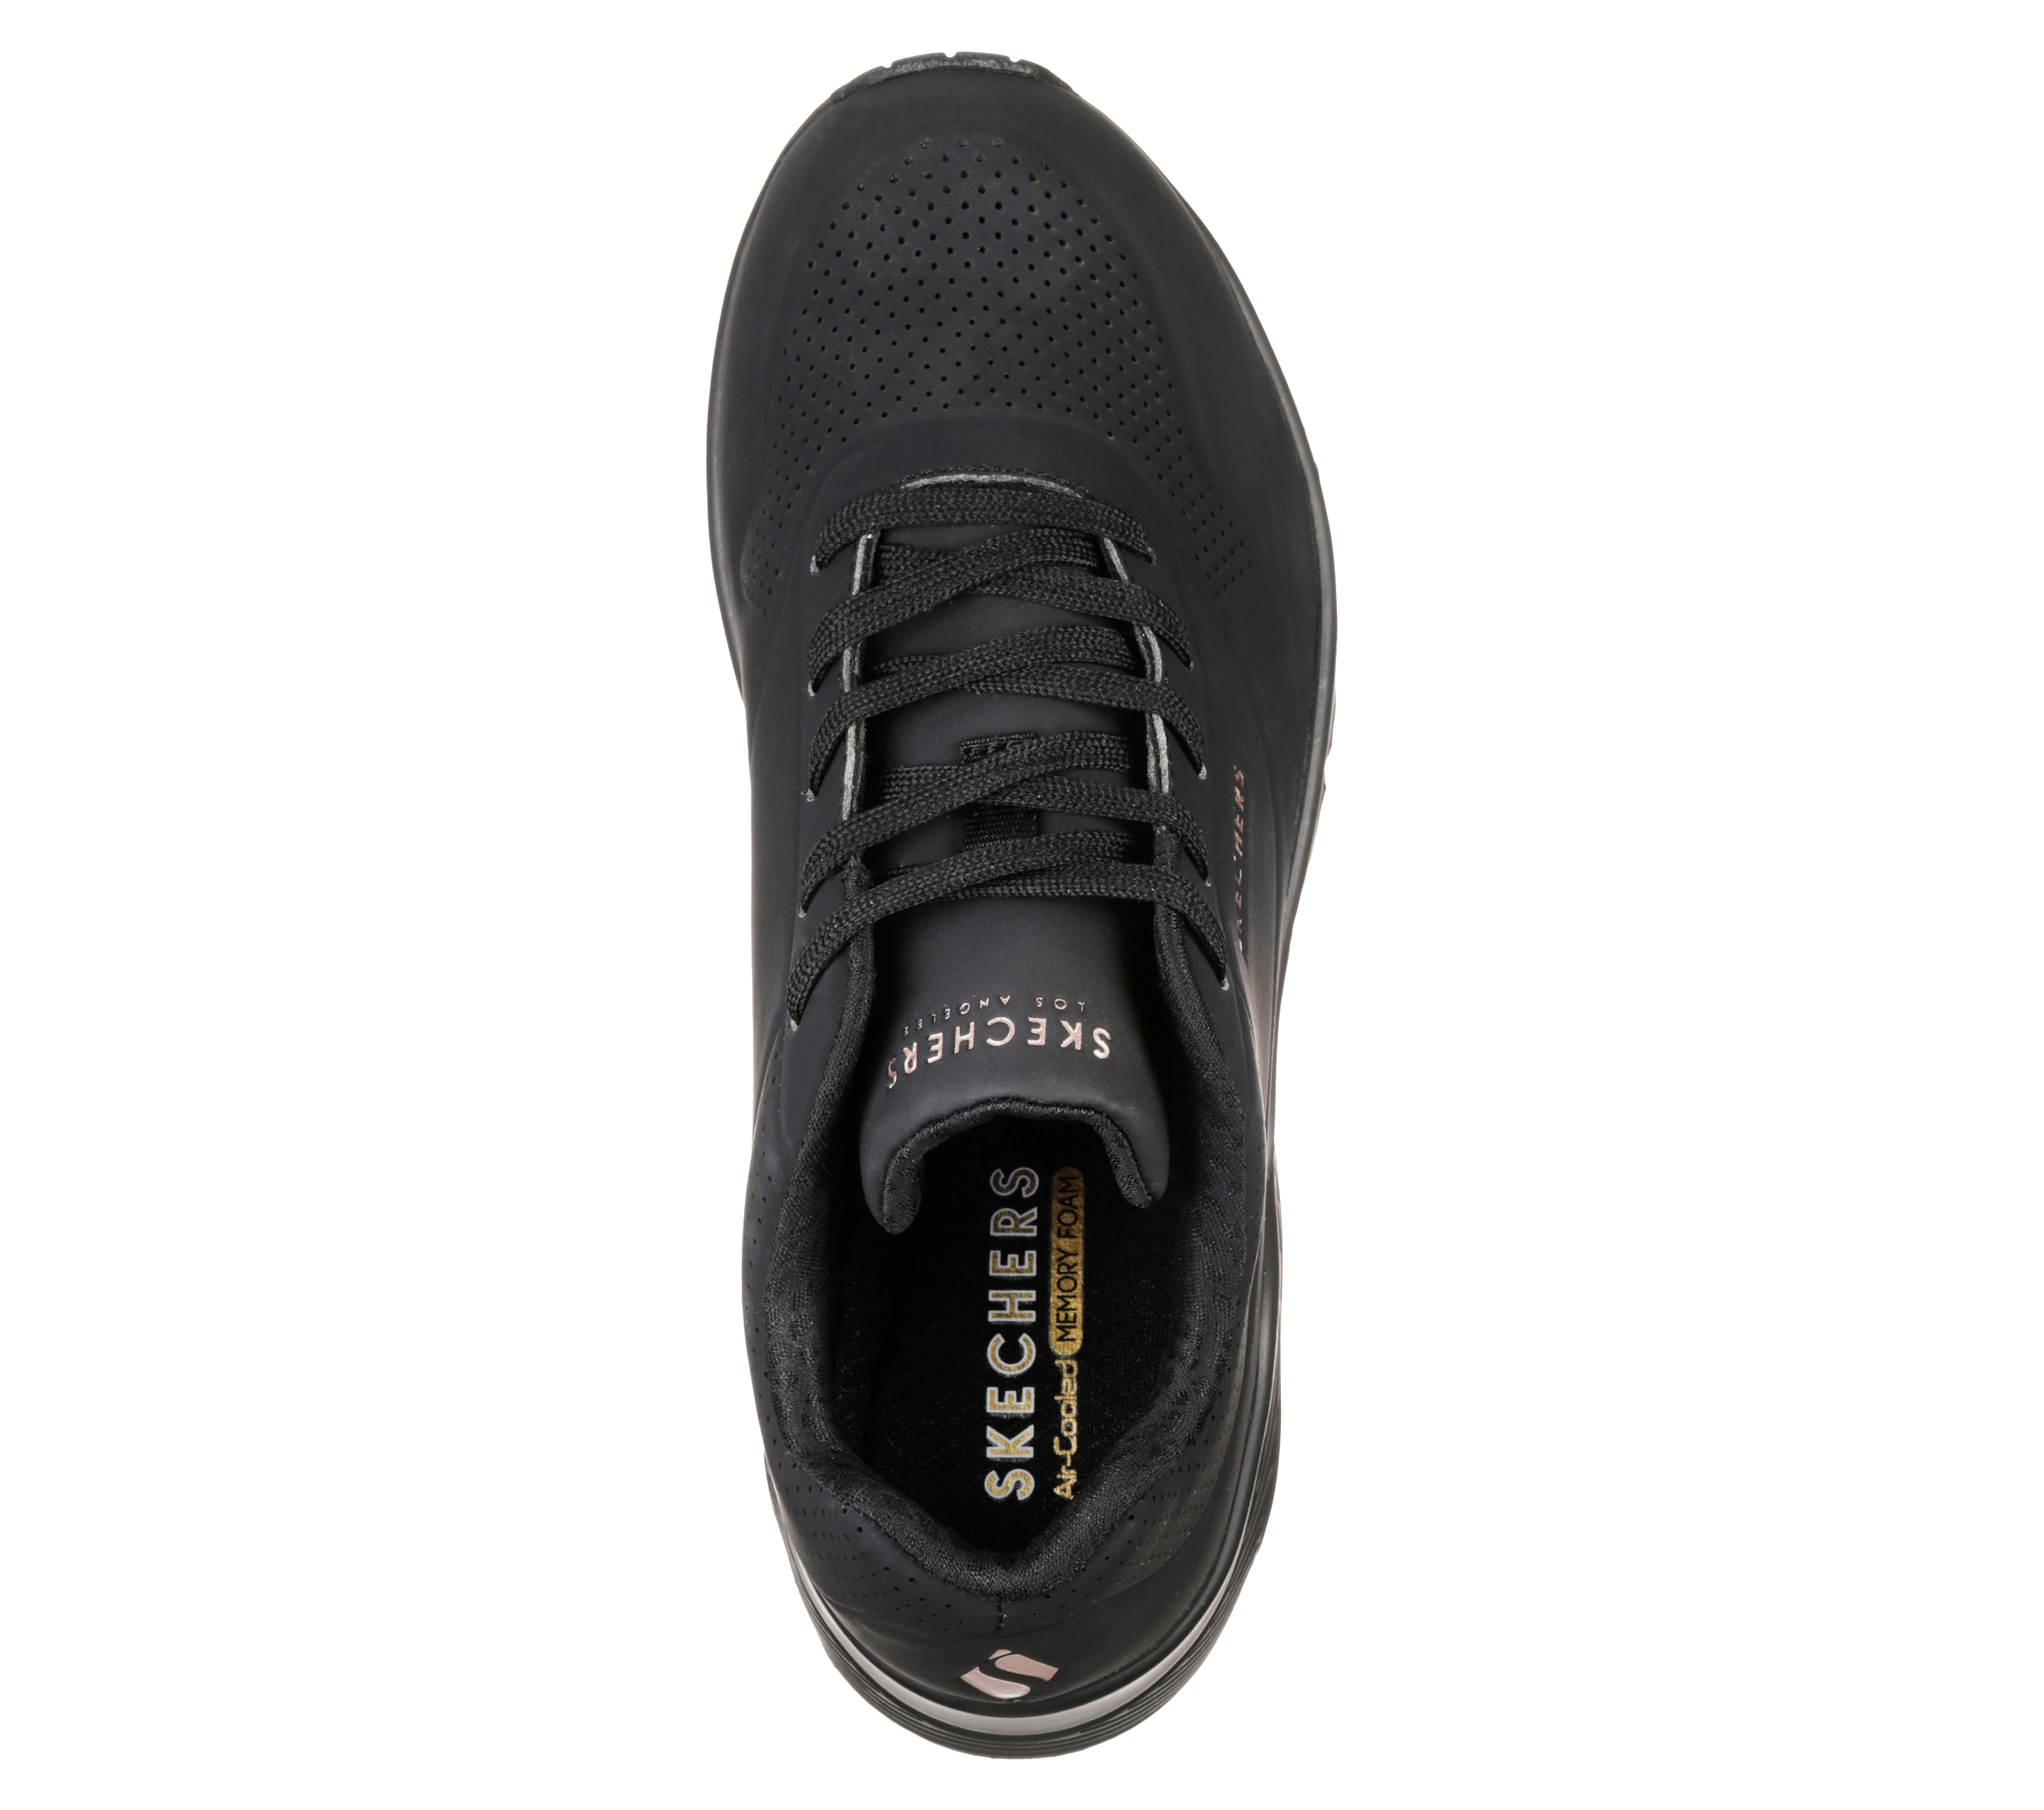 Skechers Sneakers - Uno - Stand On Air - 73690-RST - Online shop for  sneakers, shoes and boots